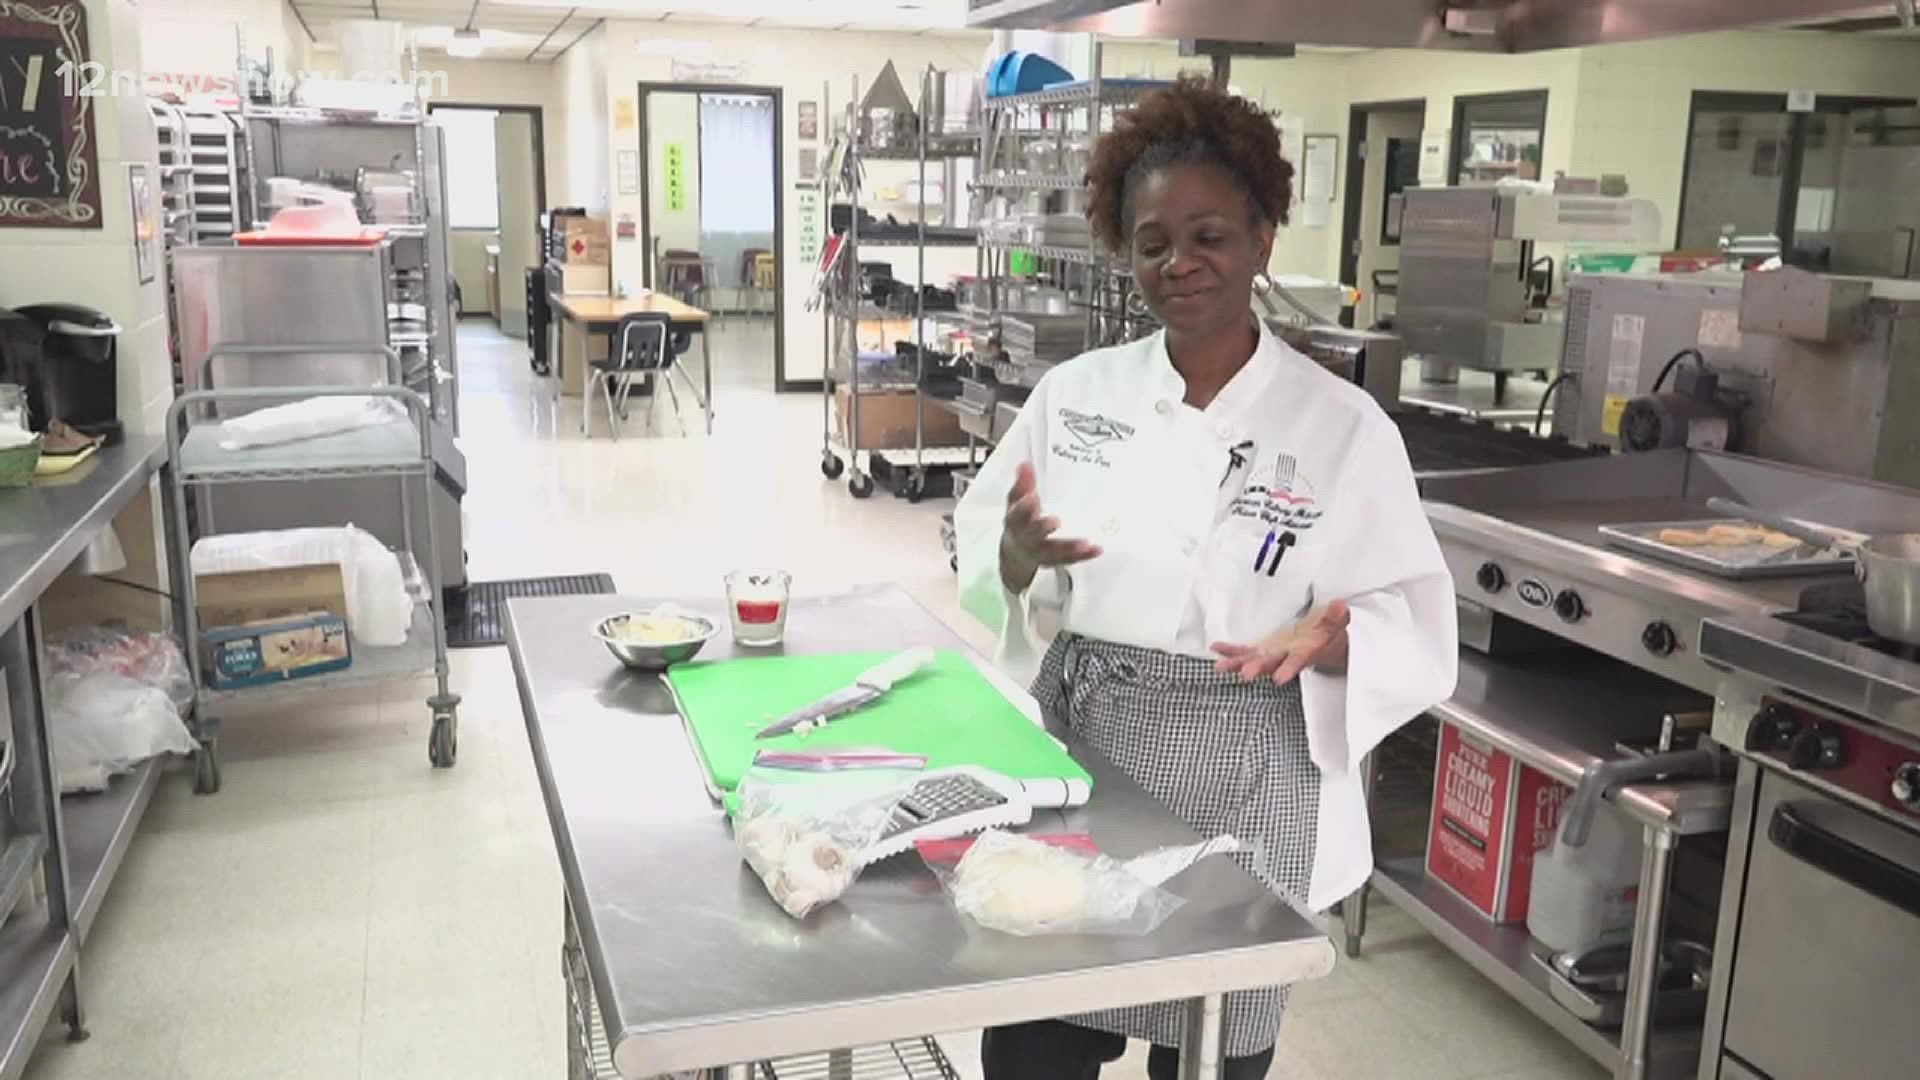 One local culinary teacher is proving you can have the best of both worlds.